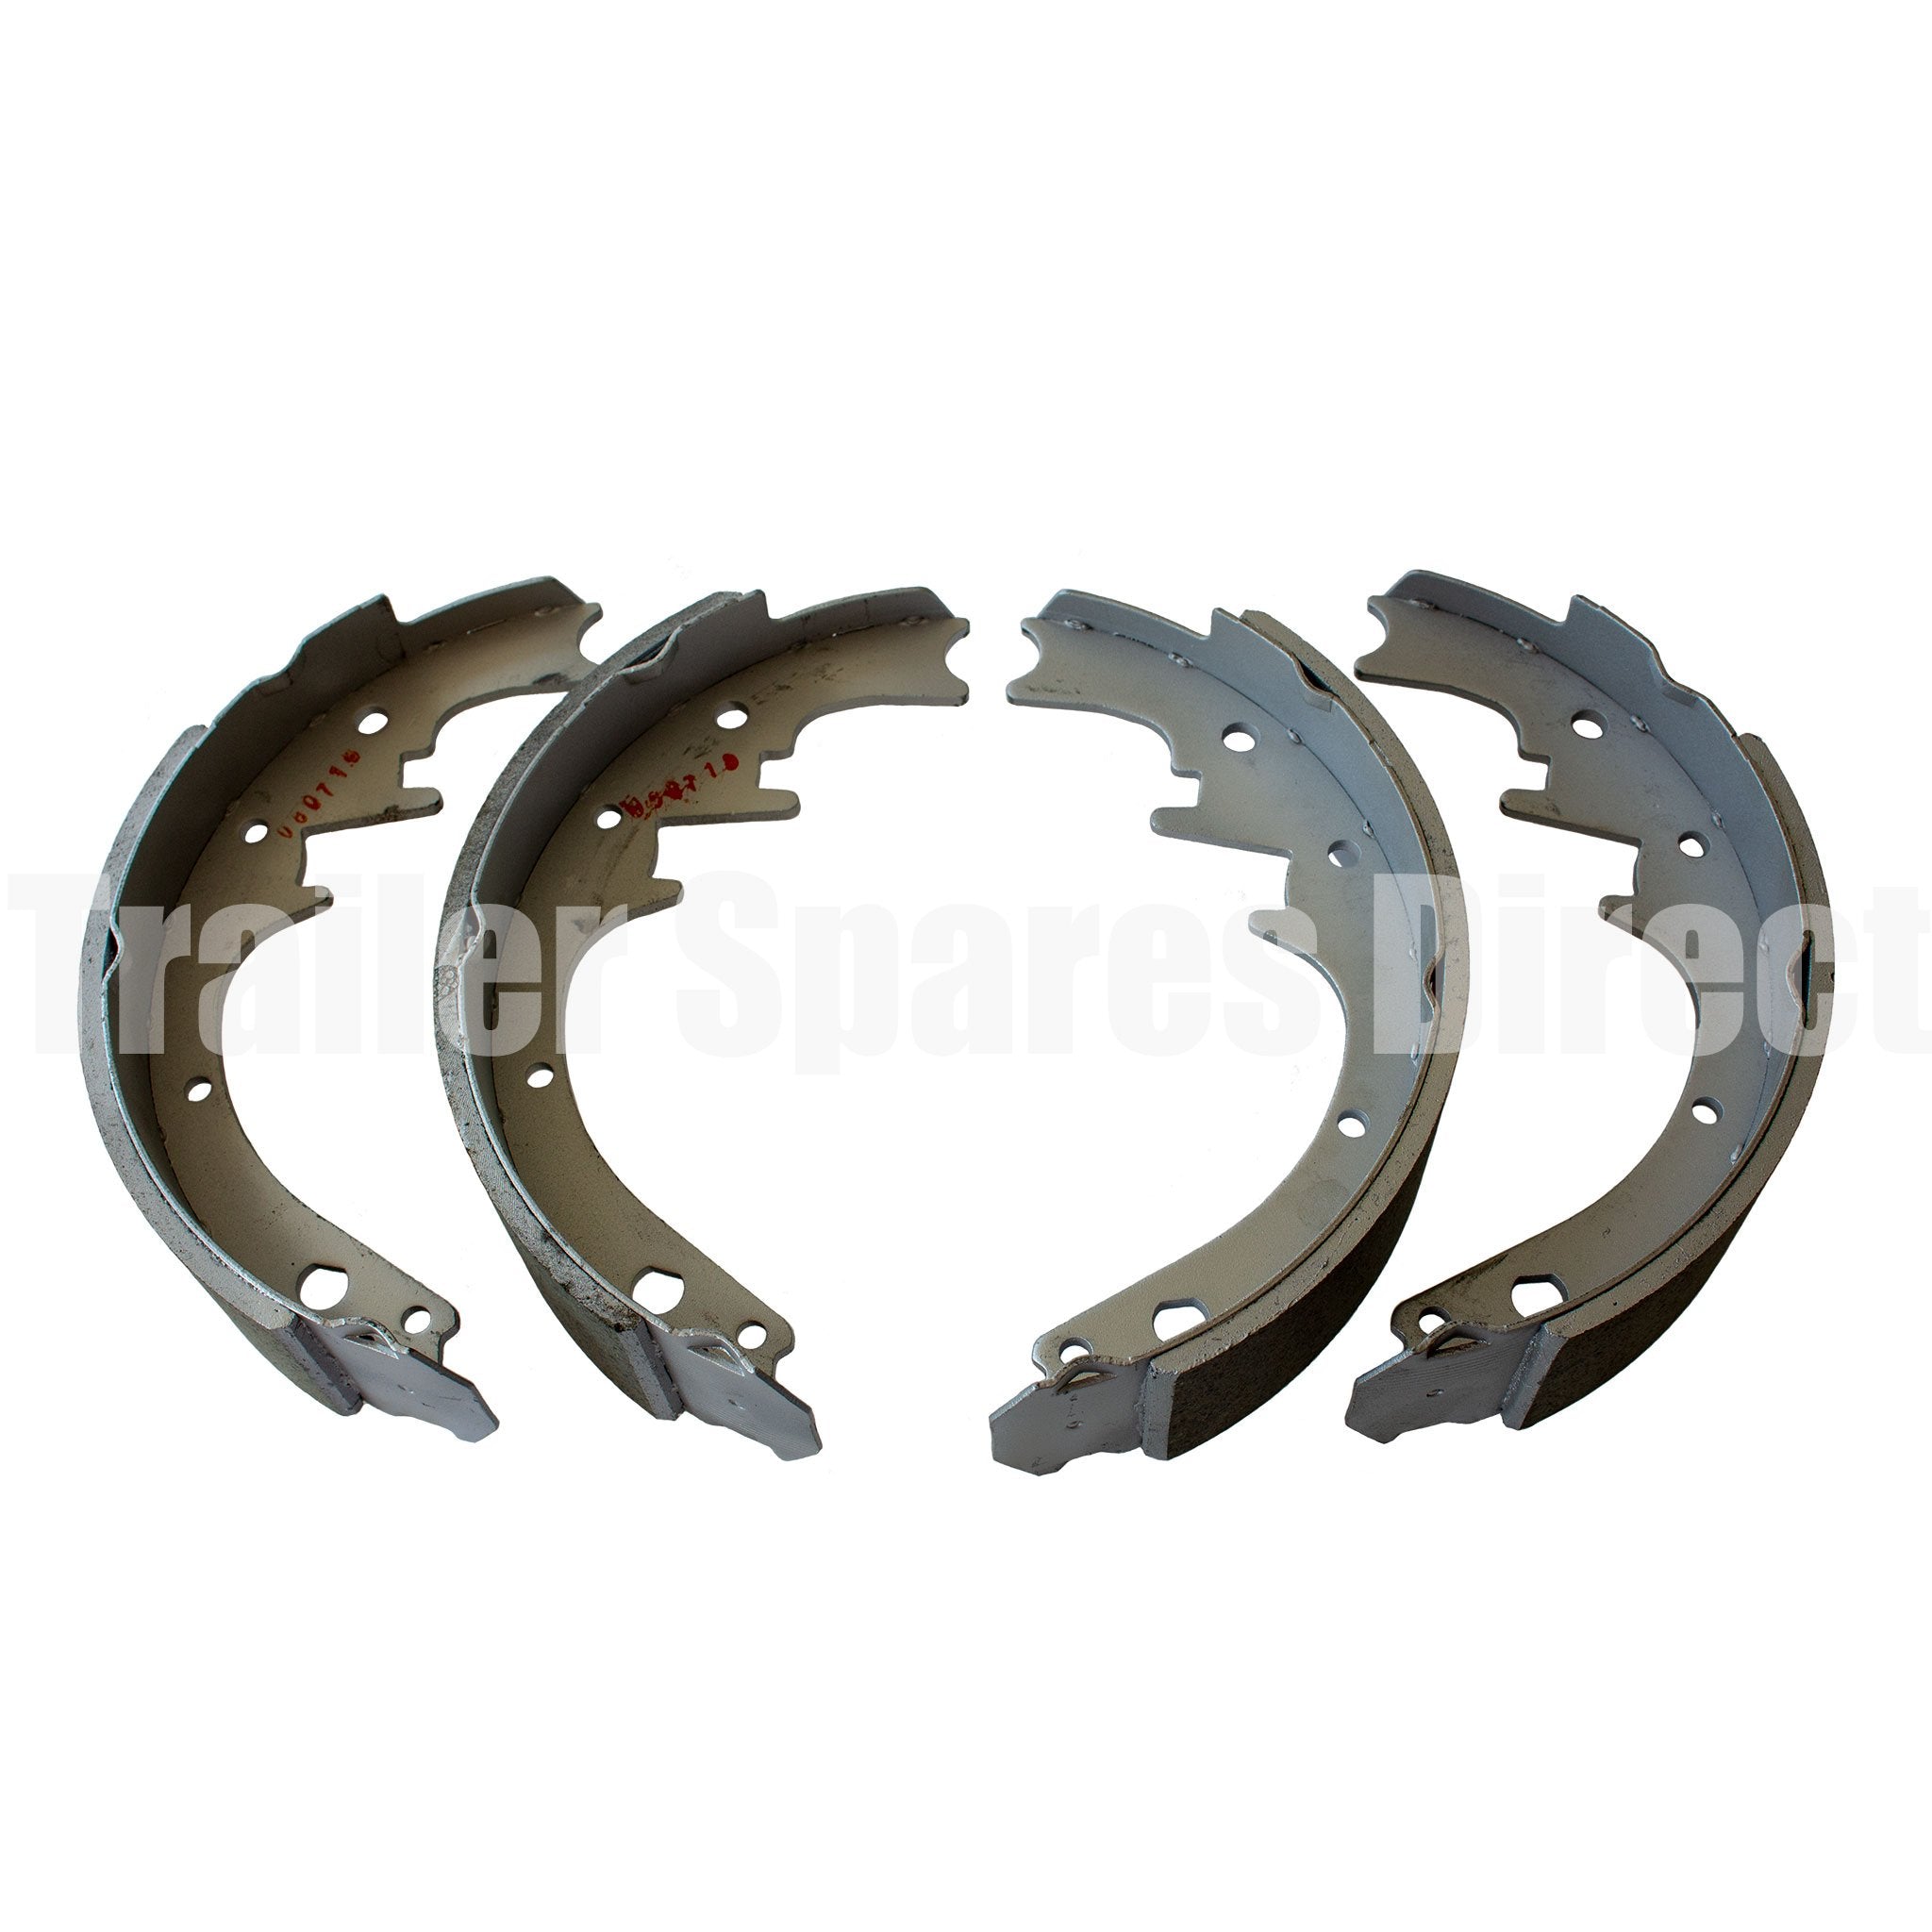 10 inch hydraulic brake shoes dacromet coated set of 4 – Trailer Spares ...